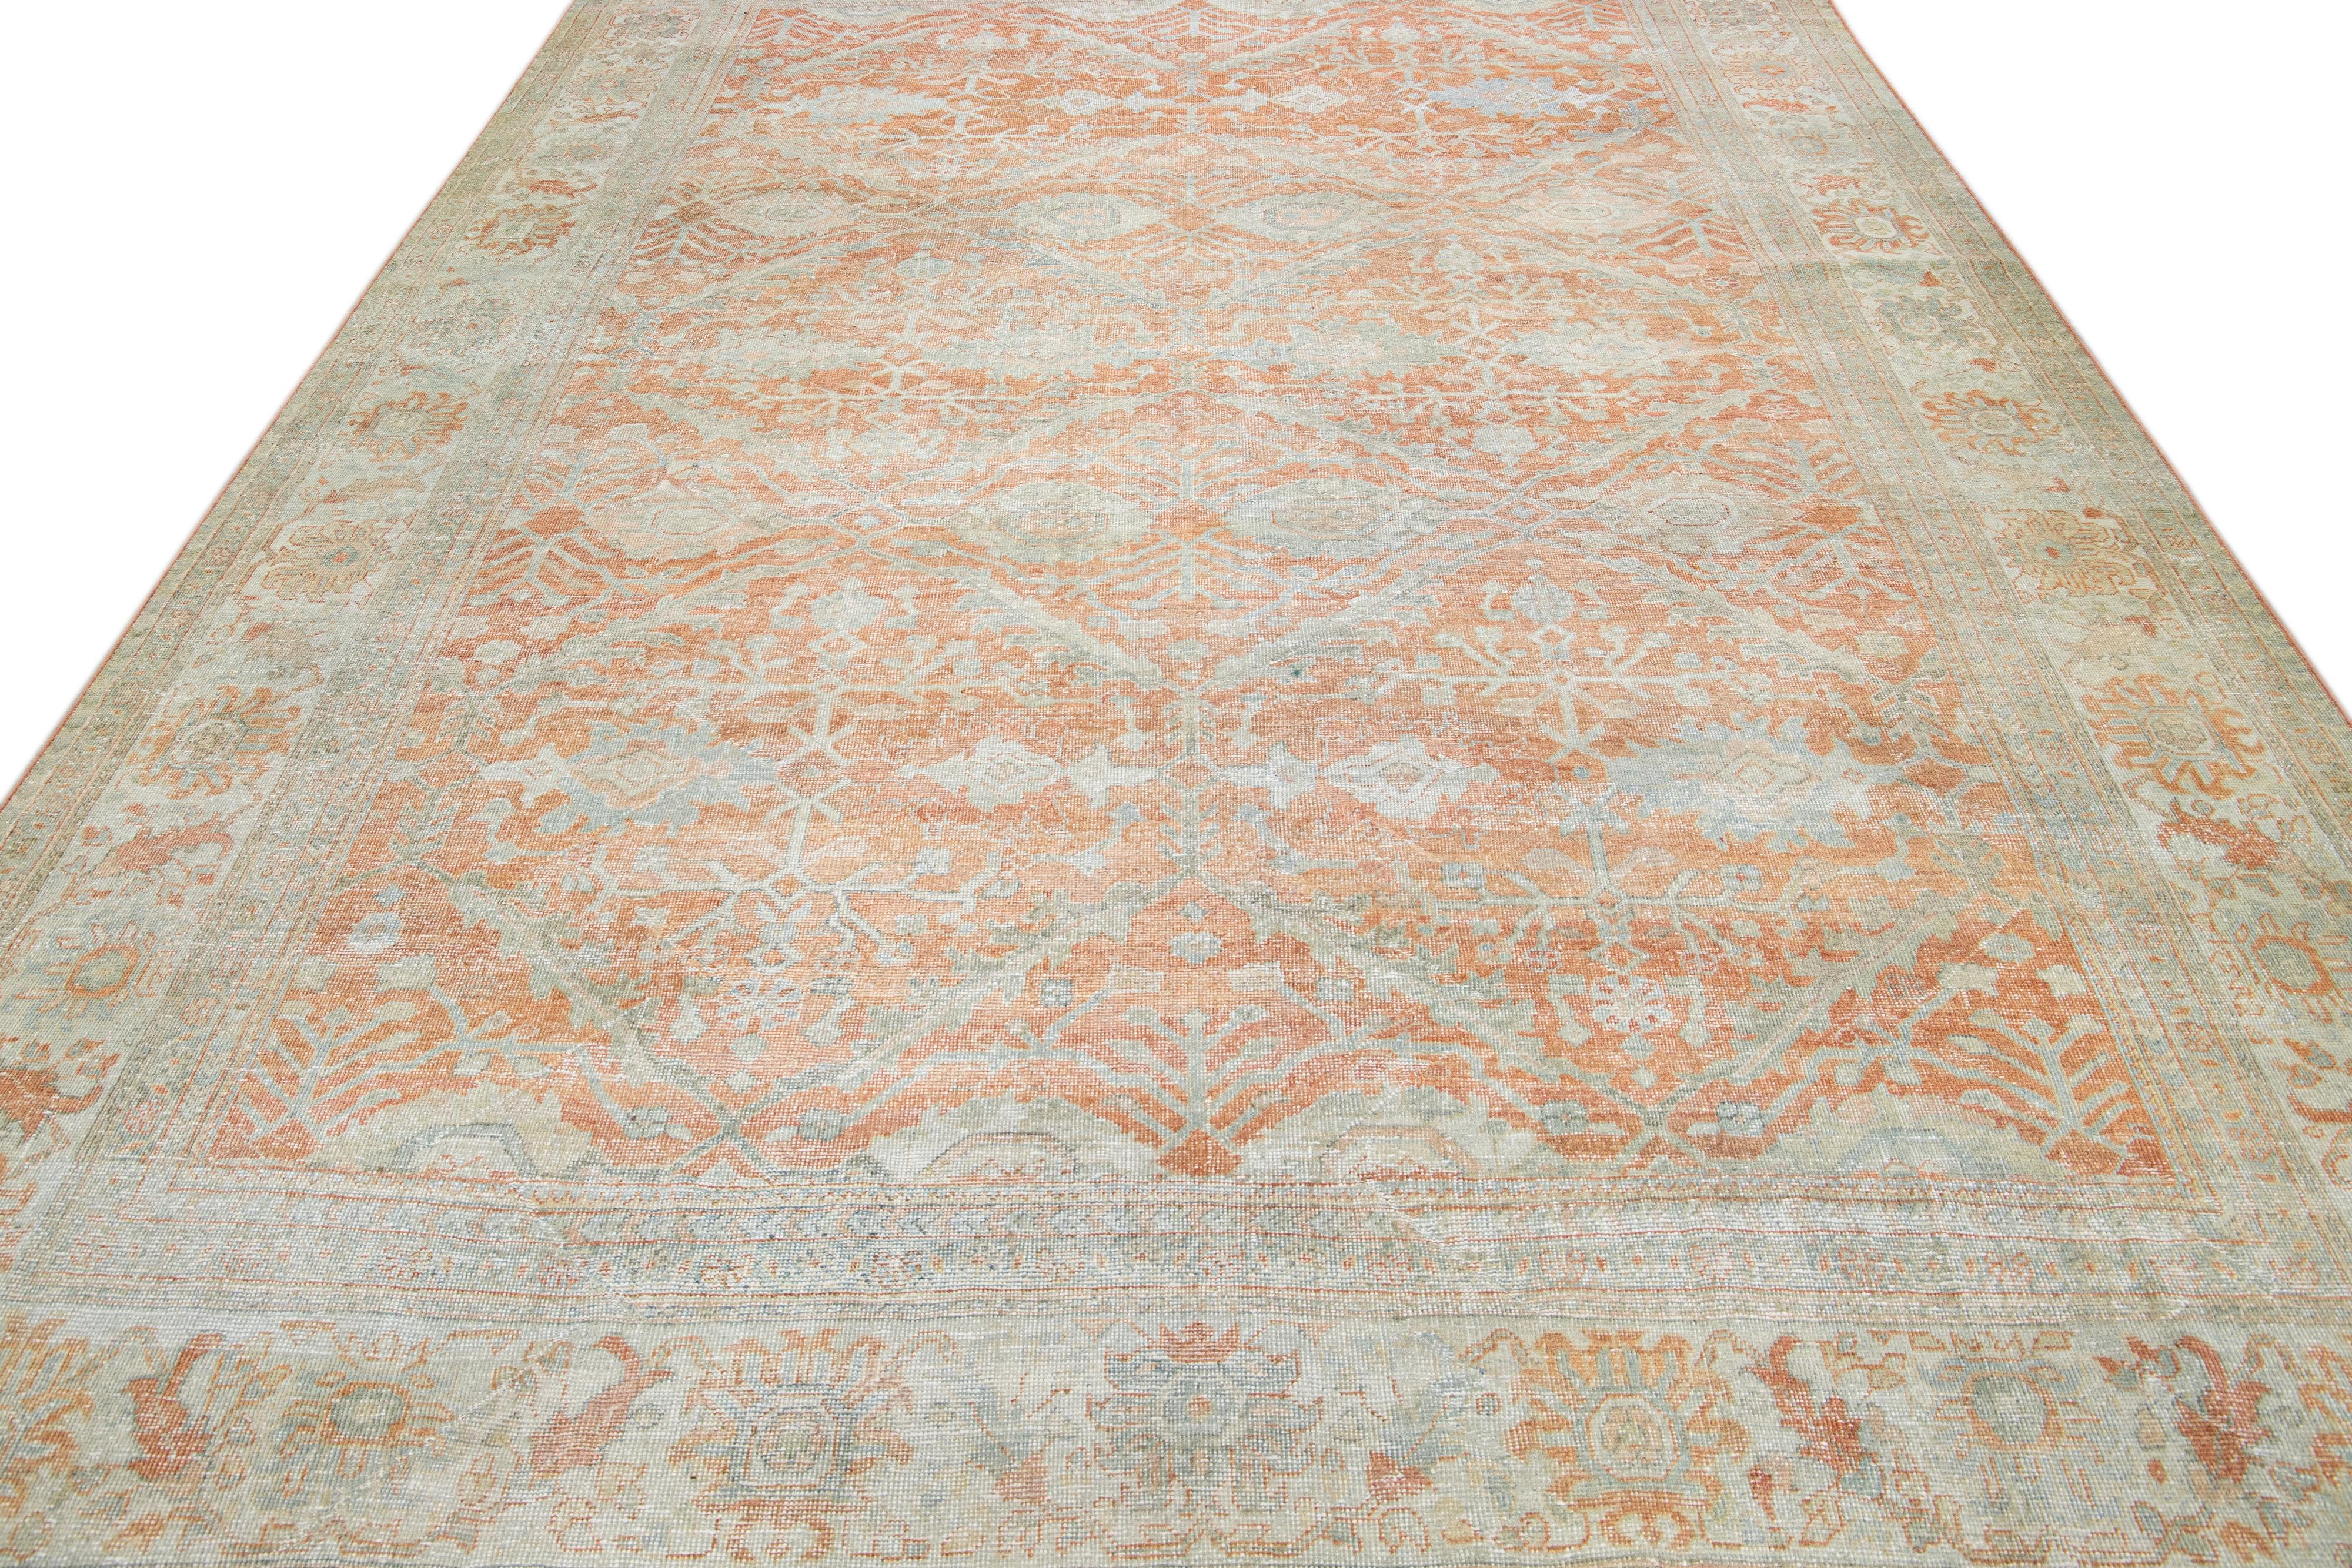 Islamic Antique Sultanabad Handmade Floral Pattern Orange Wool Rug For Sale